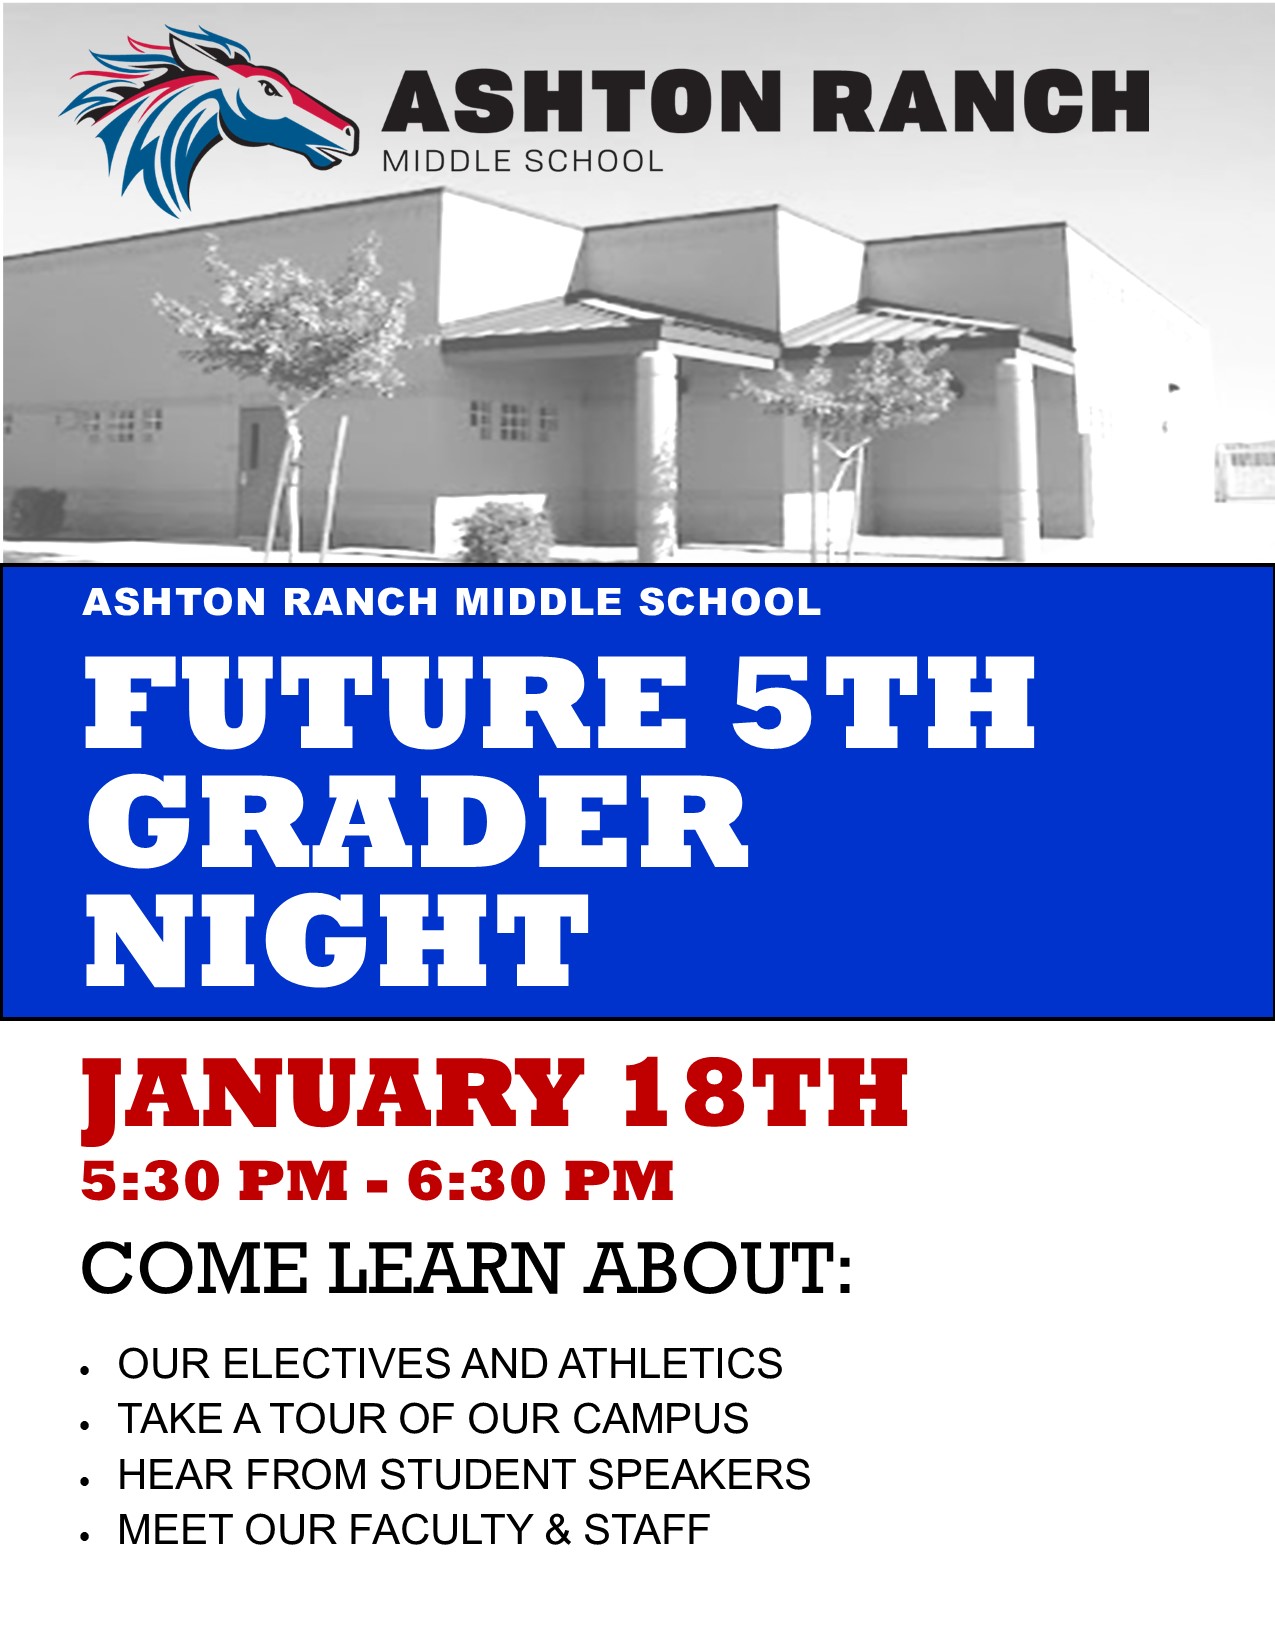 flyer with picture of Ashton Ranch Middle School  - Future 5th Grader Night January 18th 5:30pm - 6:30pm